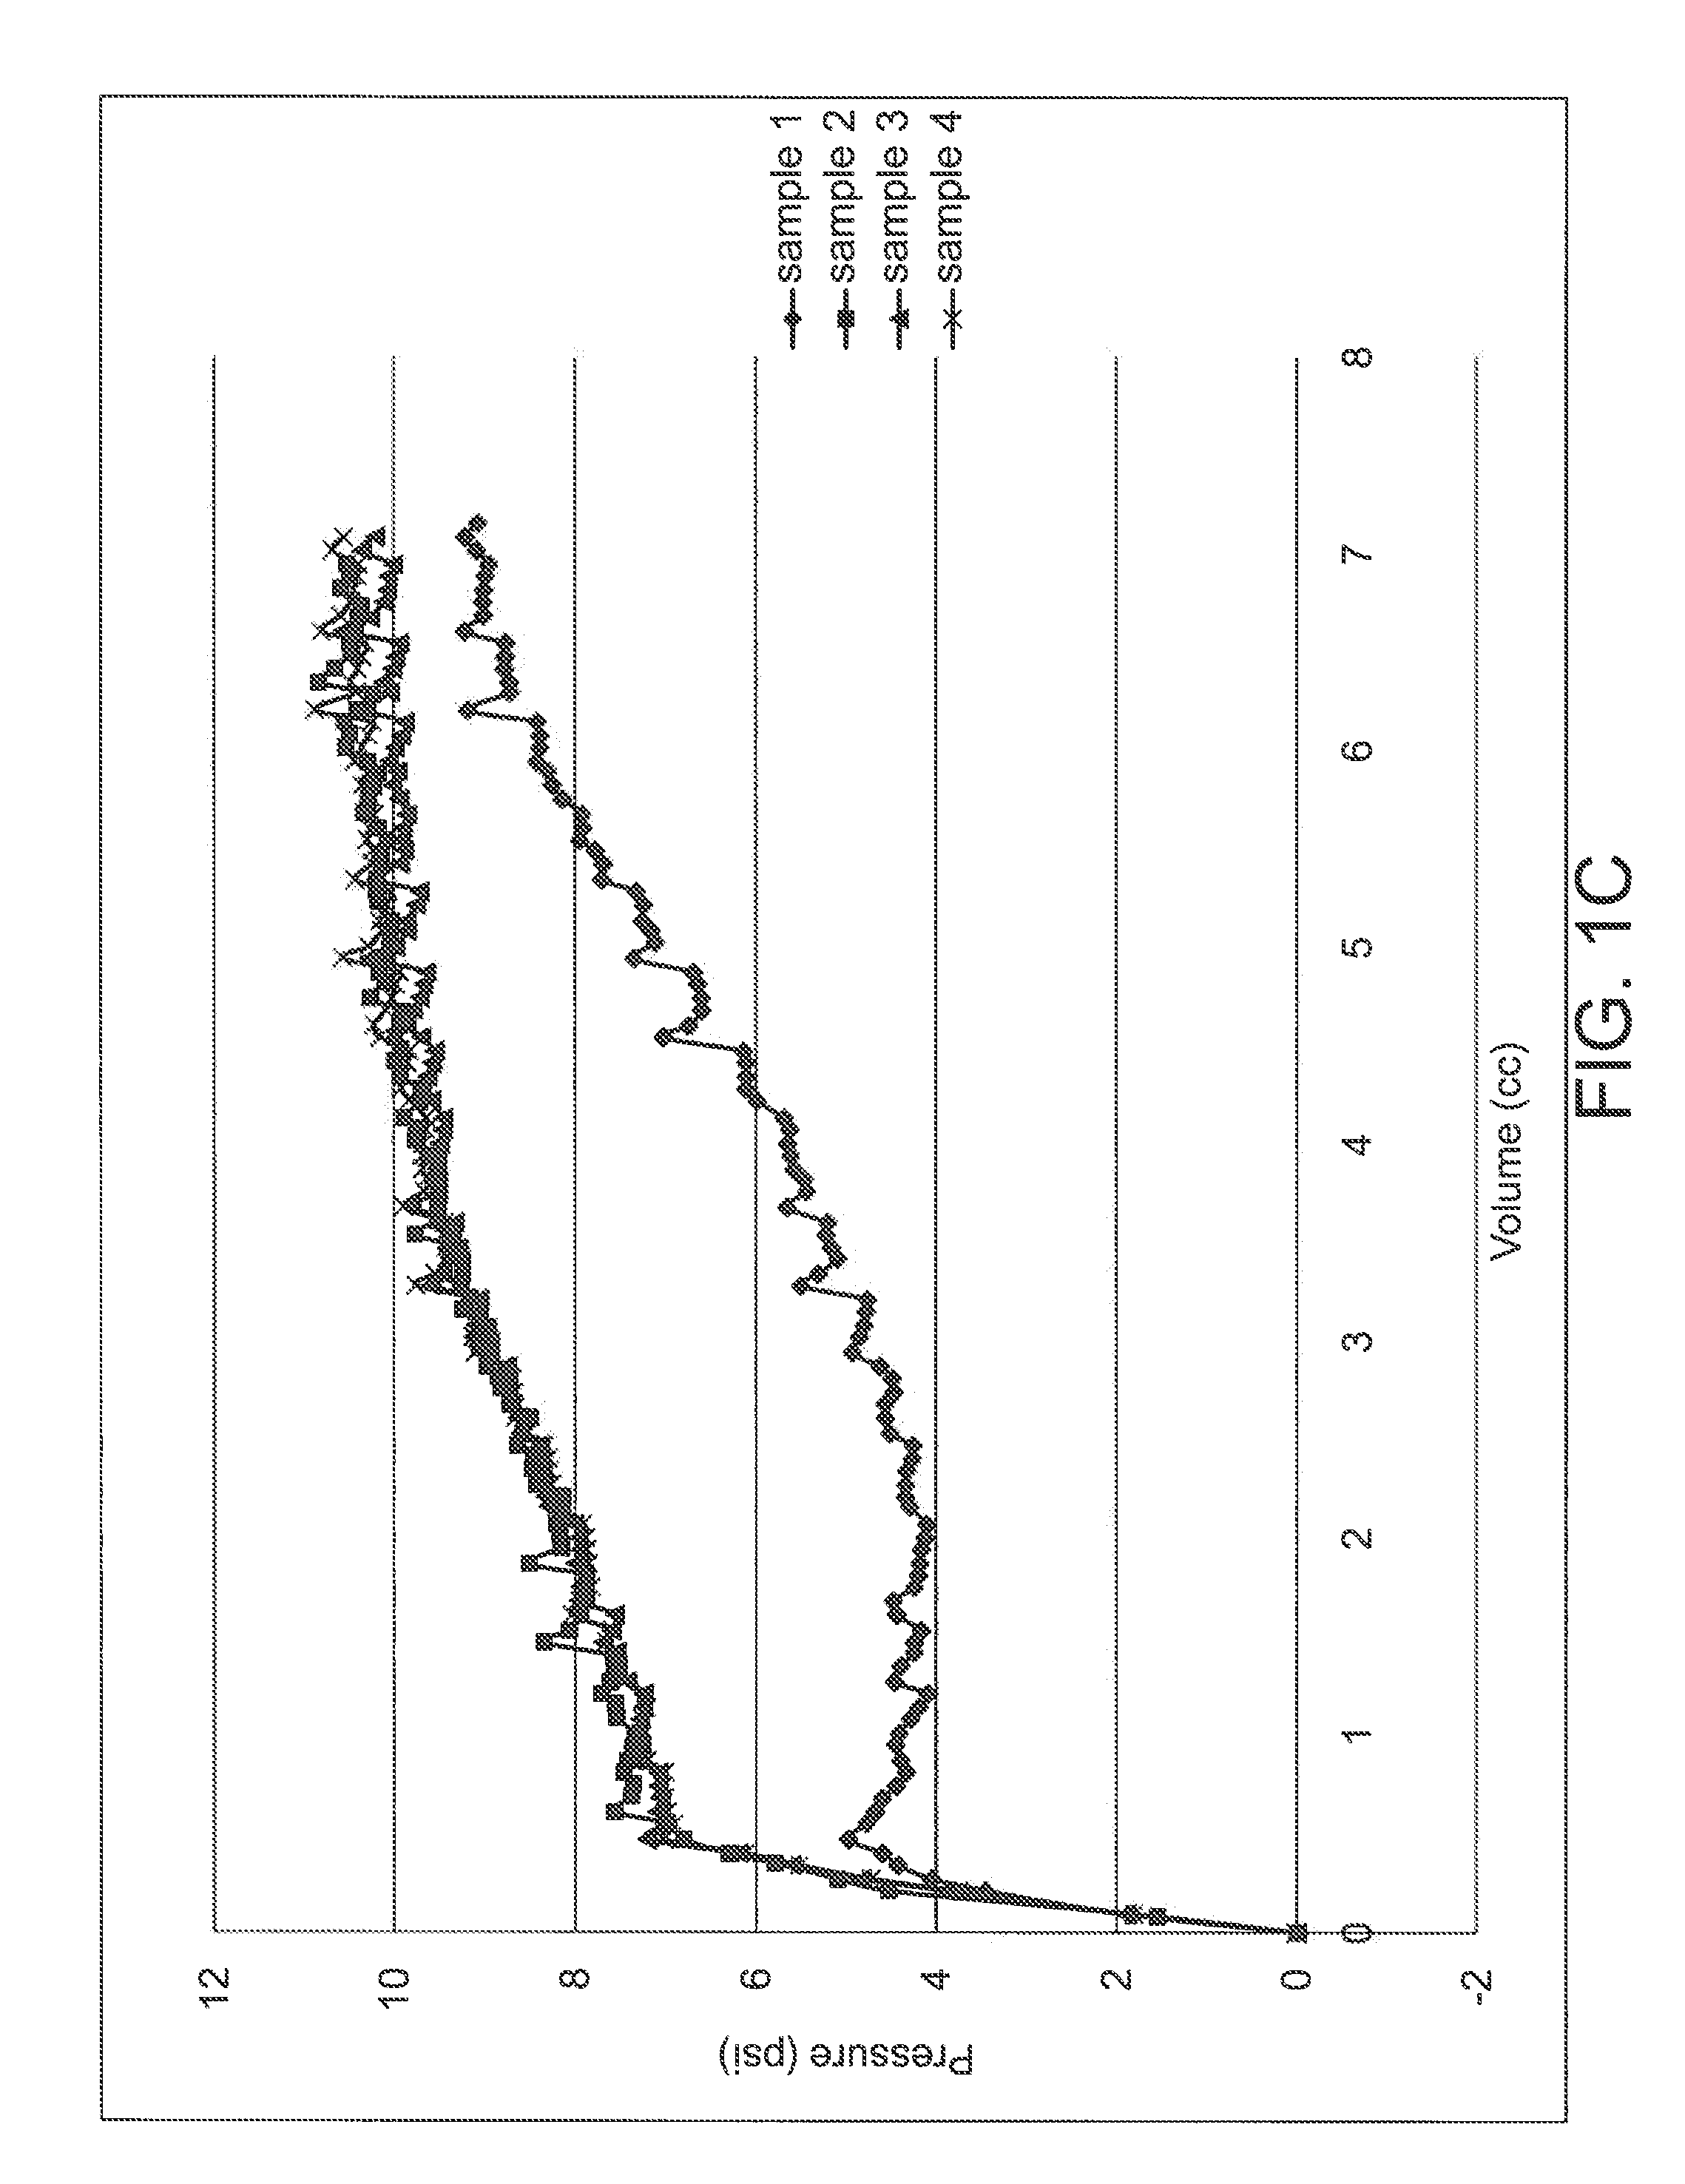 Inflatable Retention System for Enteral Feeding Device